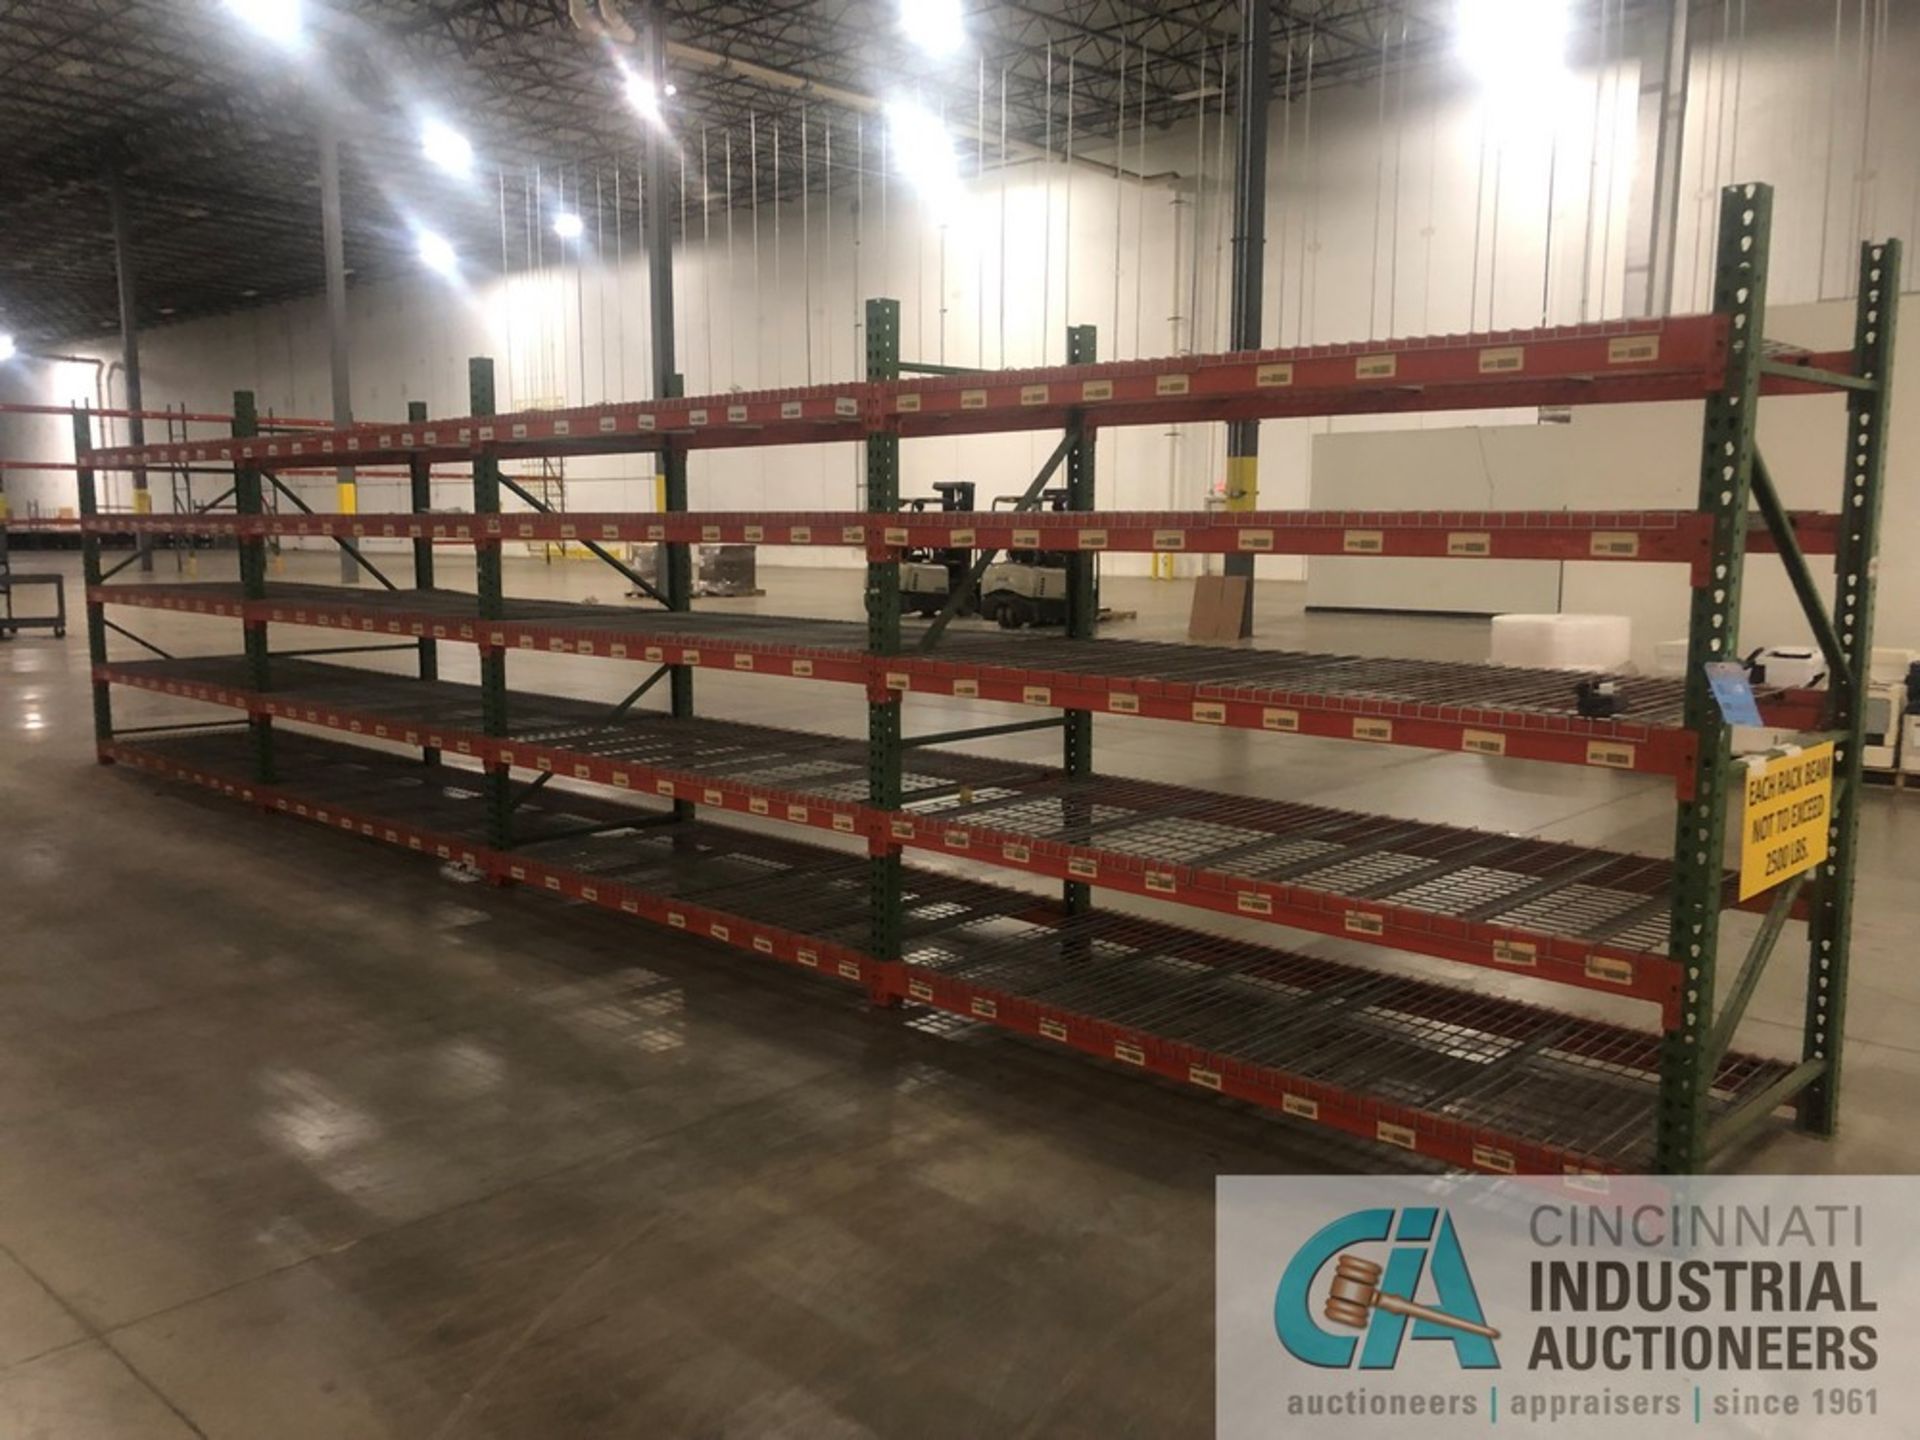 SECTIONS 42" X 96" X 90" HIGH PALLET RACK, (5) UPRIGHTS, (40) CROSS BEAMS, (40) 43" X 46" WIRE